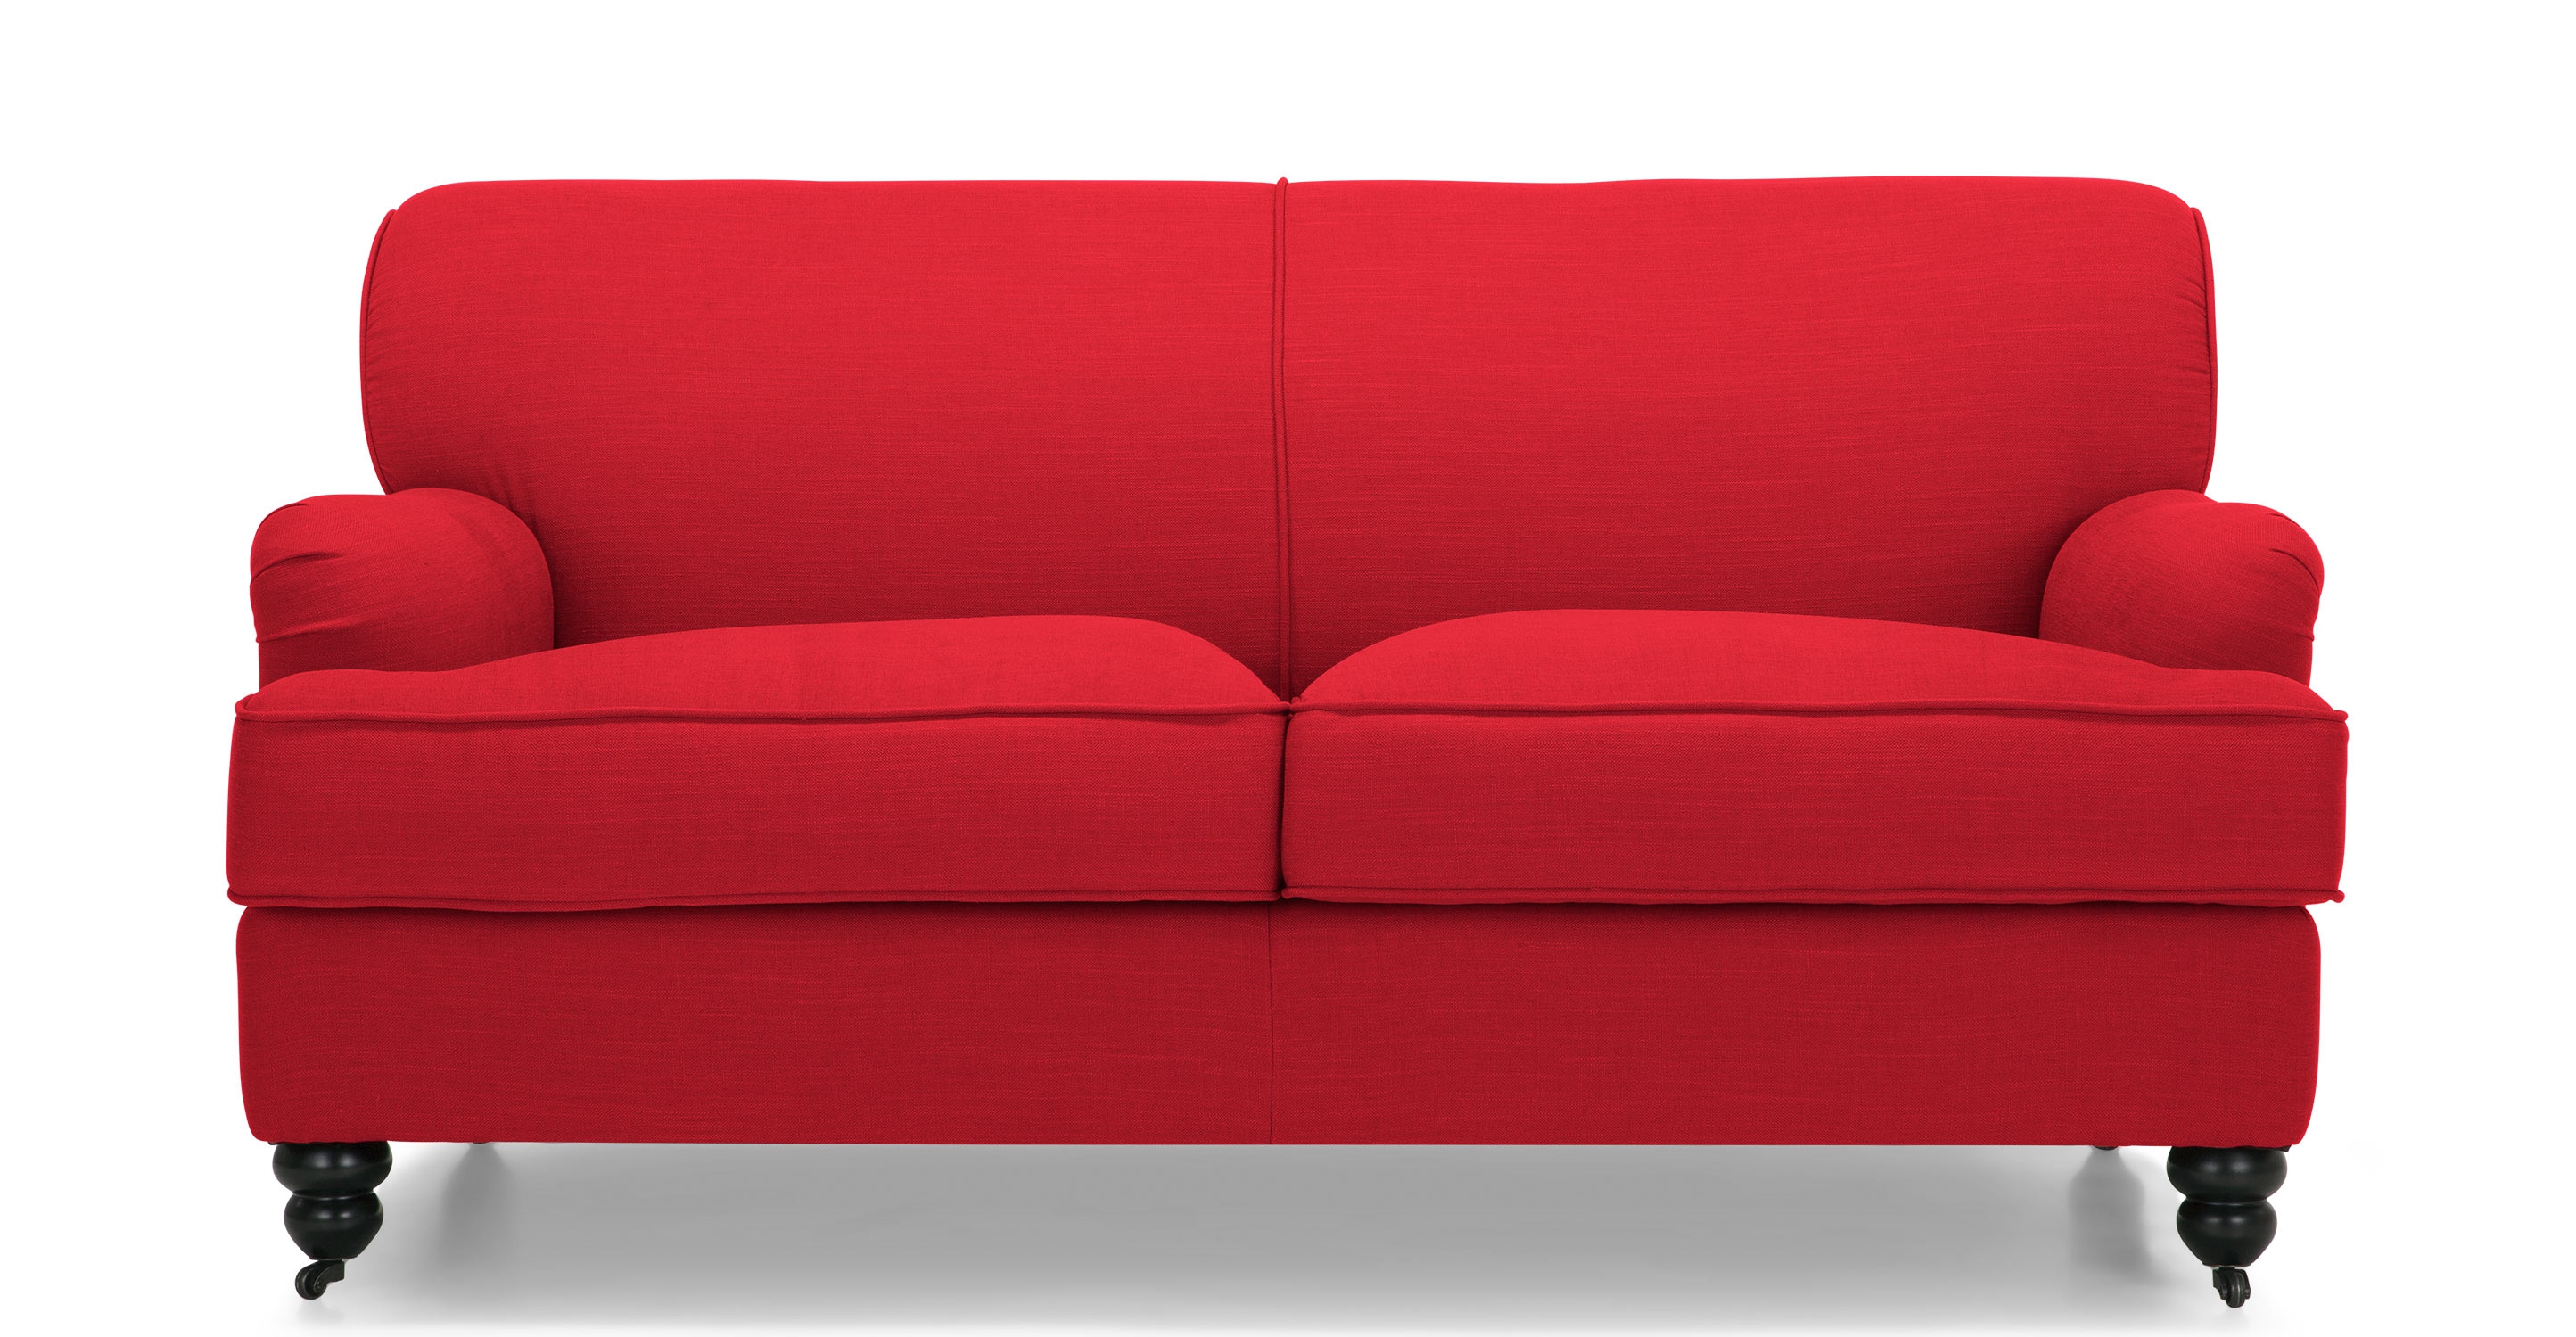 red sofas perfect red sofa 95 for sofas and couches ideas with red sofa PBTNXAU